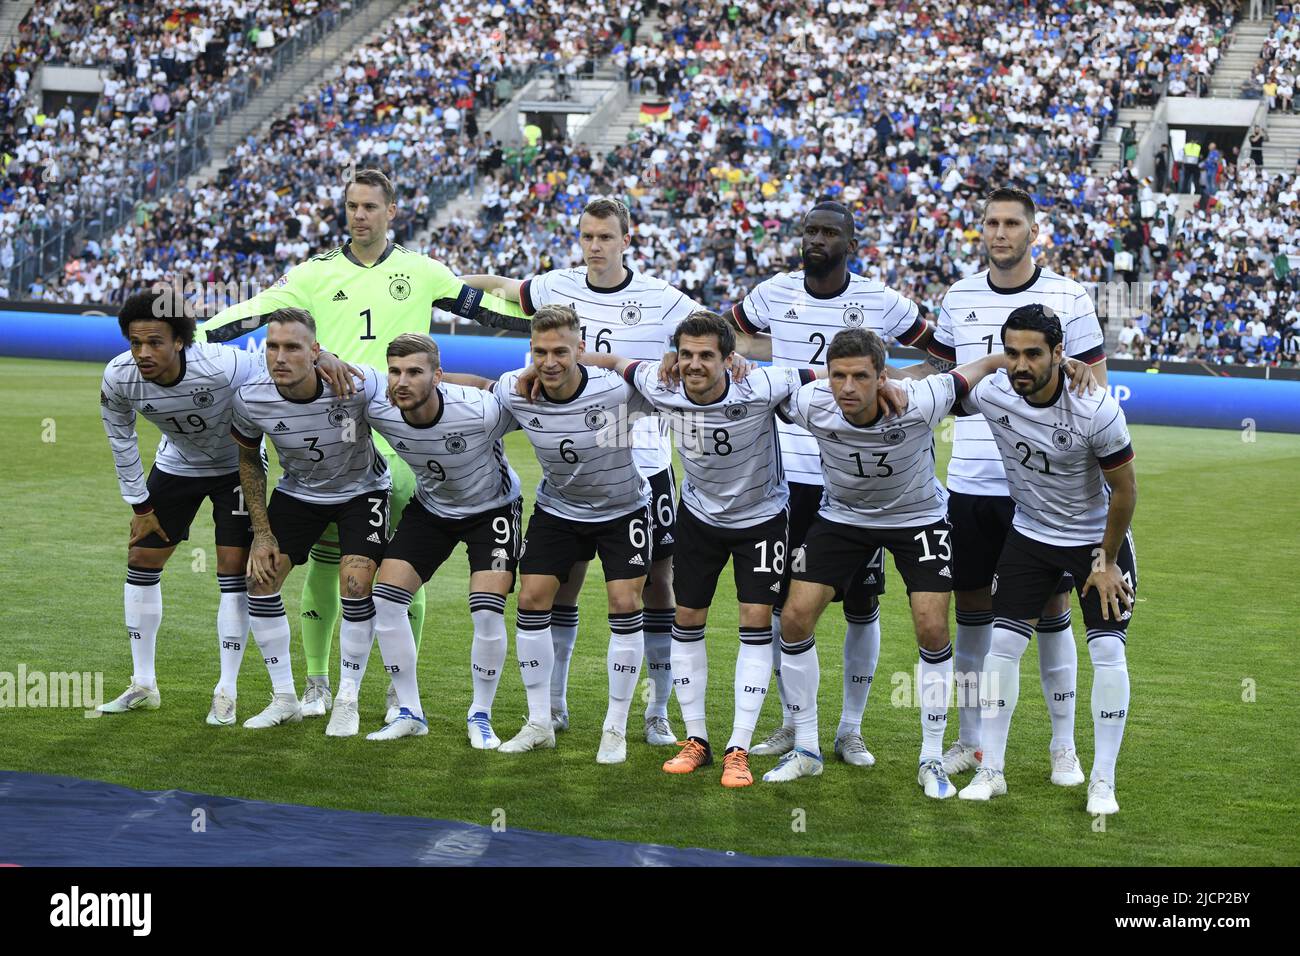 Team Germany During The Uefa Uefa Nations League 2022 2023 Match Between Germany 5 2 Italy At Borussia Park Stadium On June 14 2022 In Monchengladbach Germany Credit Maurizio Borsariafloalamy Live News 2JCP2BY 